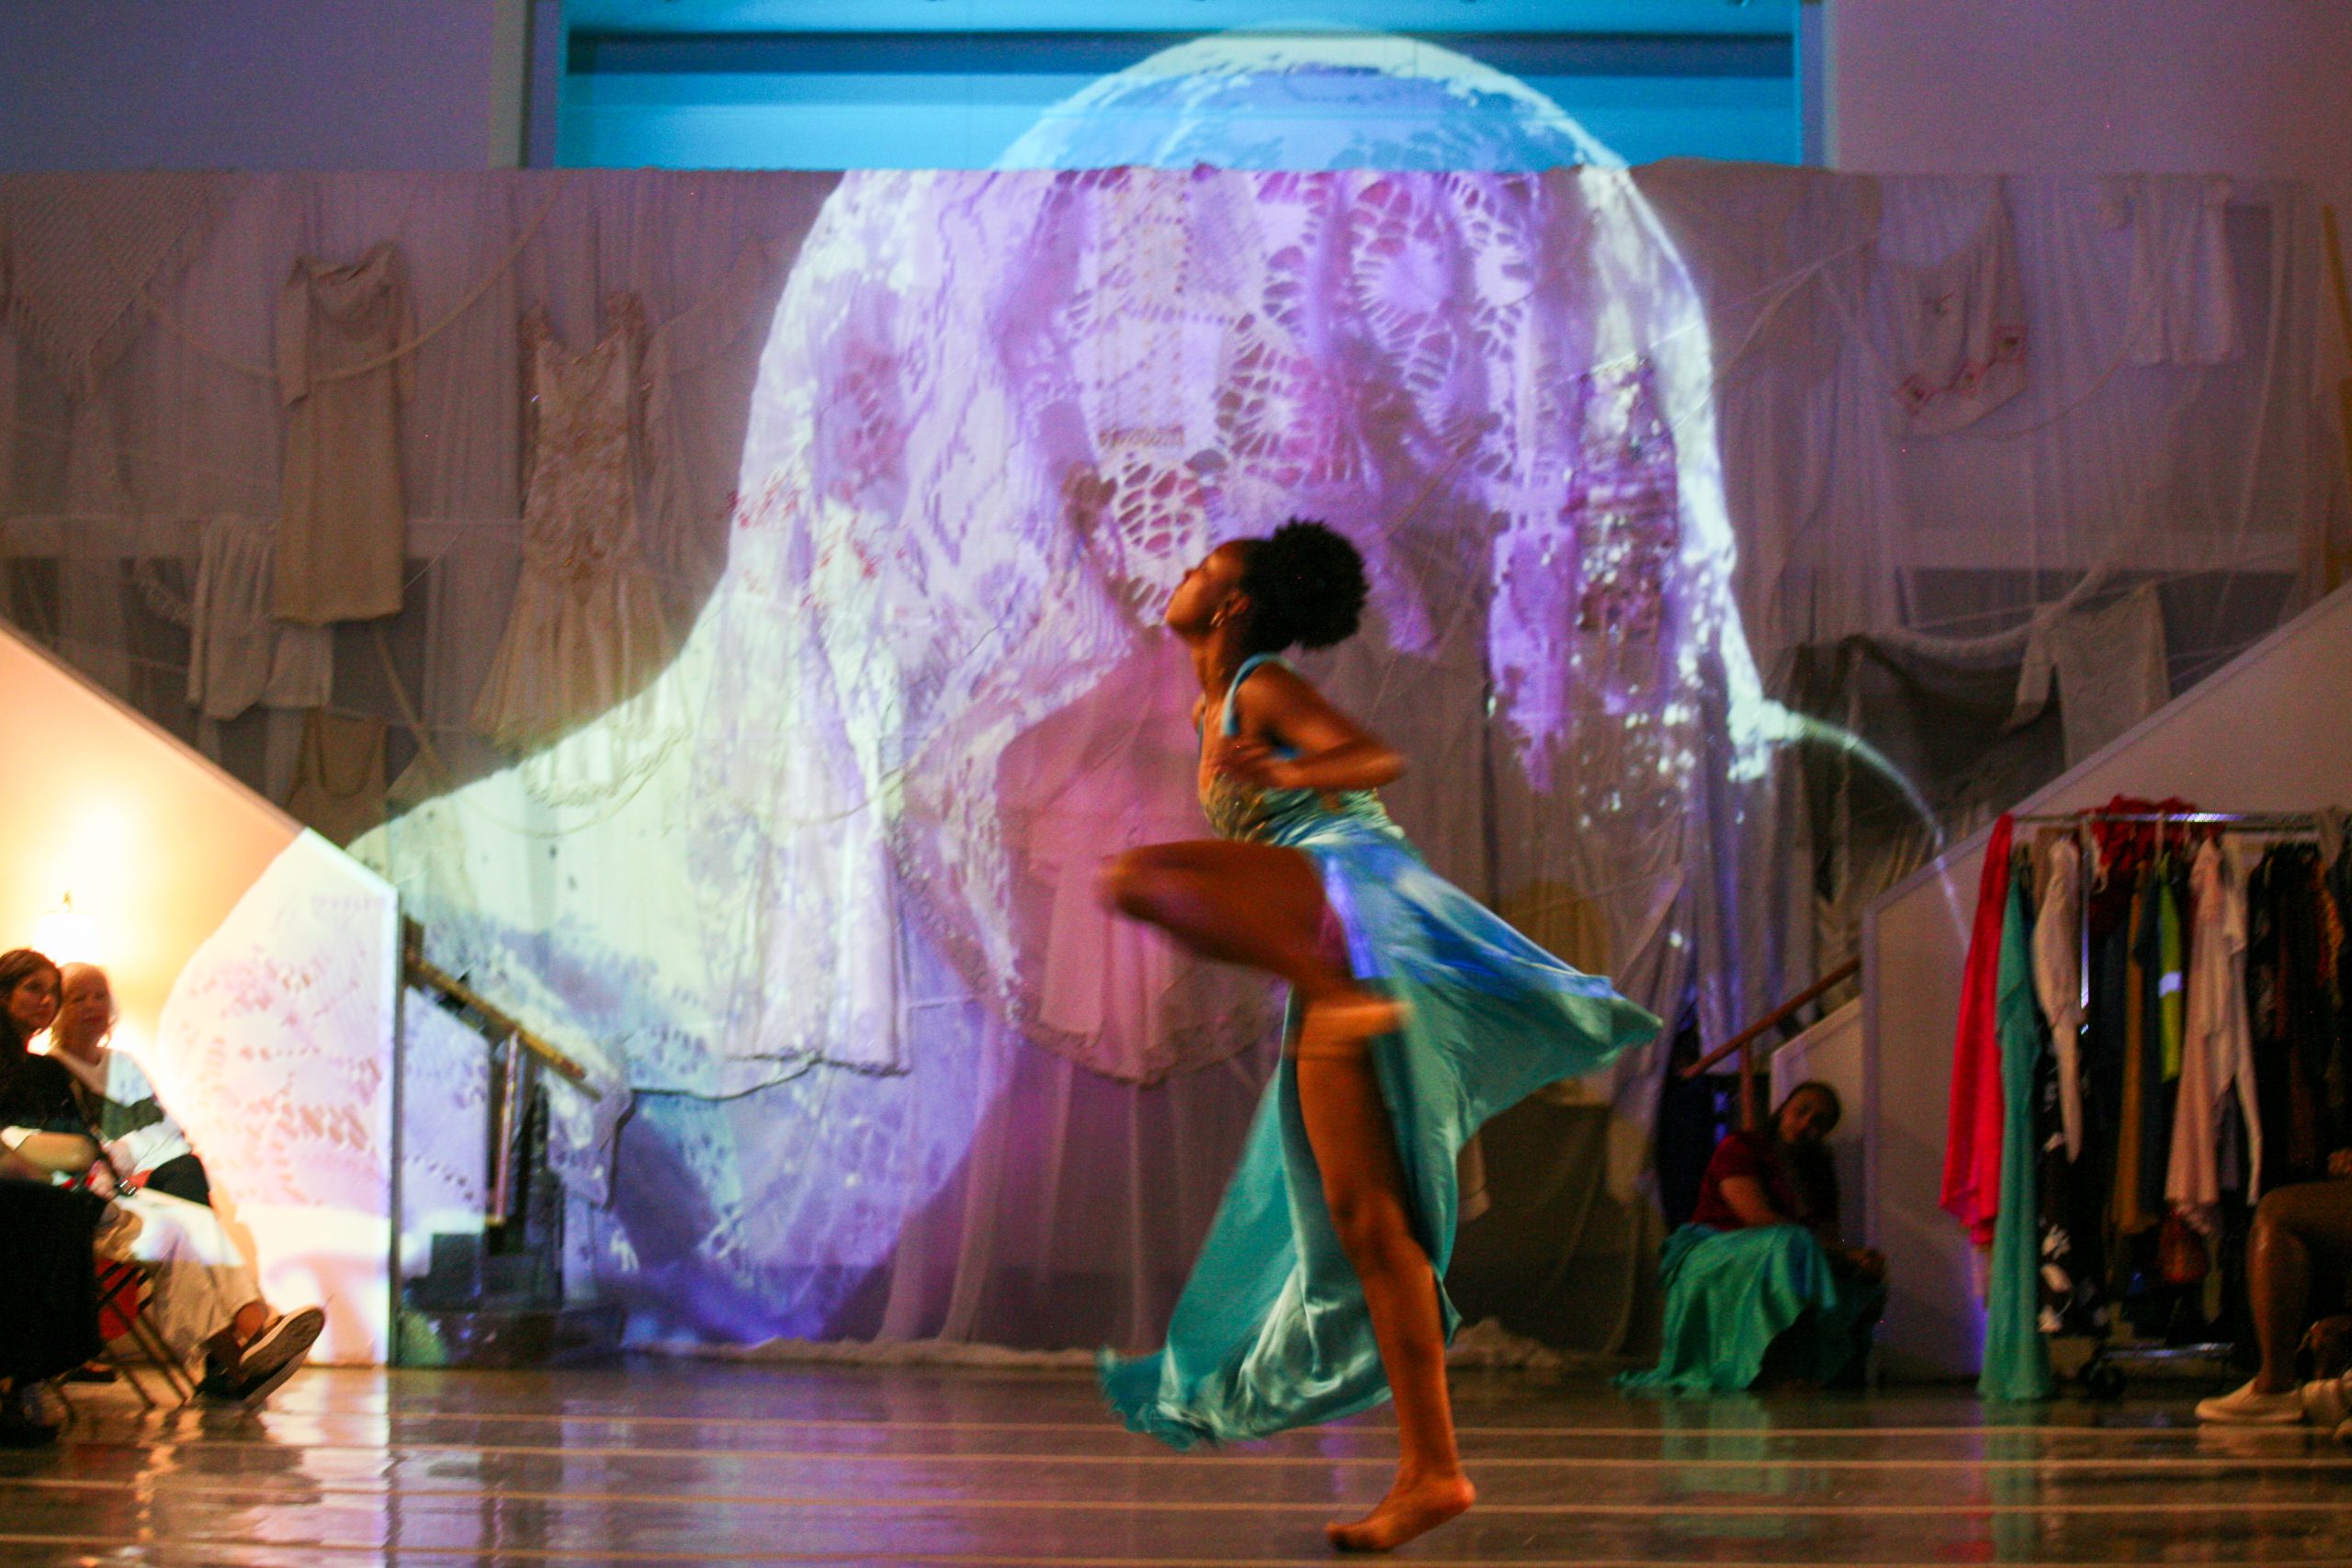 a woman in a teal dress dances on a stage